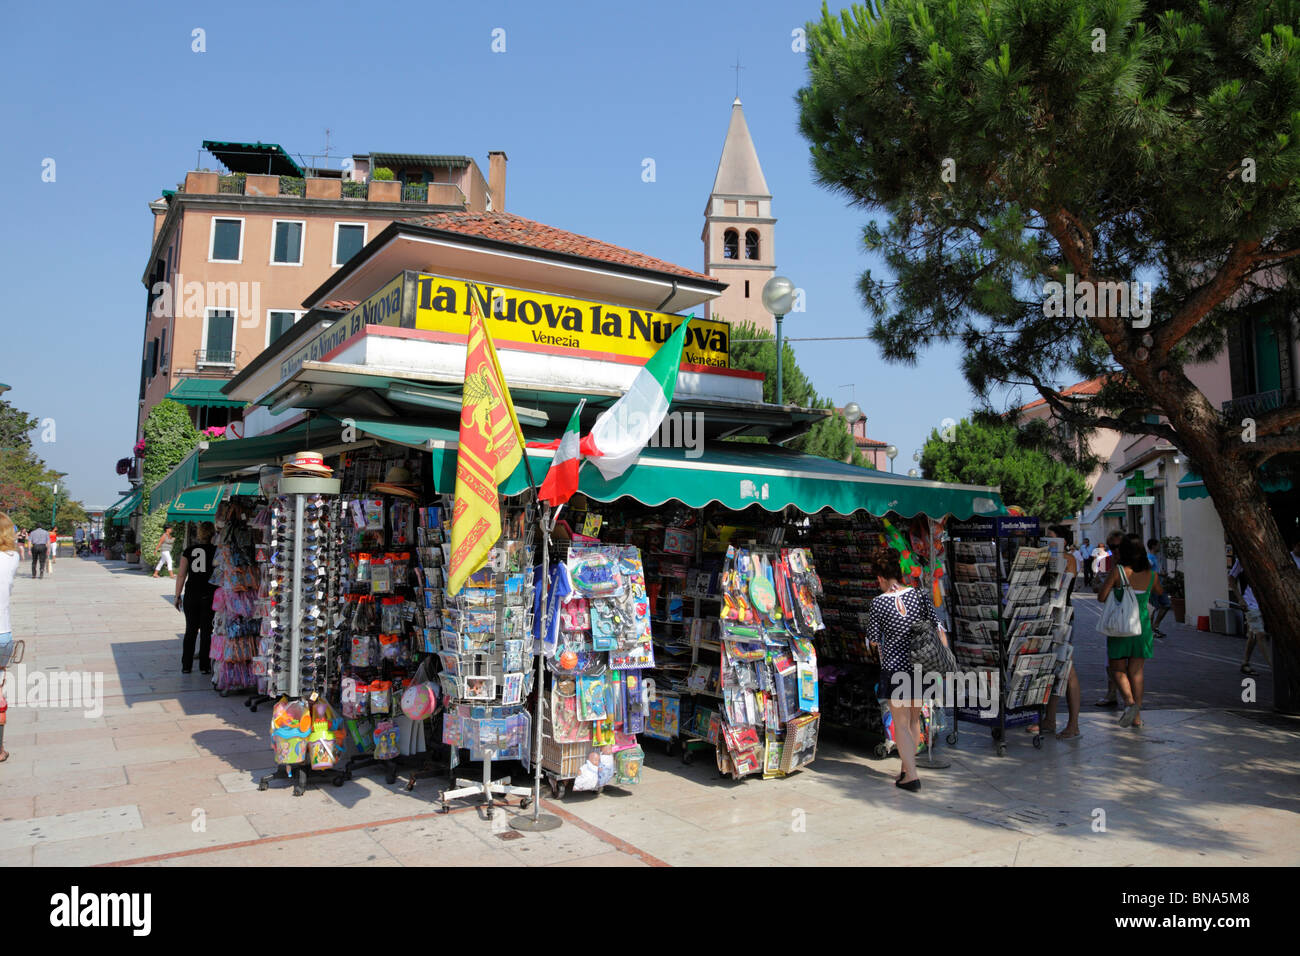 Popular tourist news agent selling beach and holiday related goods on Gran Viale Santa Maria Elisabetta Lido Island Venice Italy Stock Photo